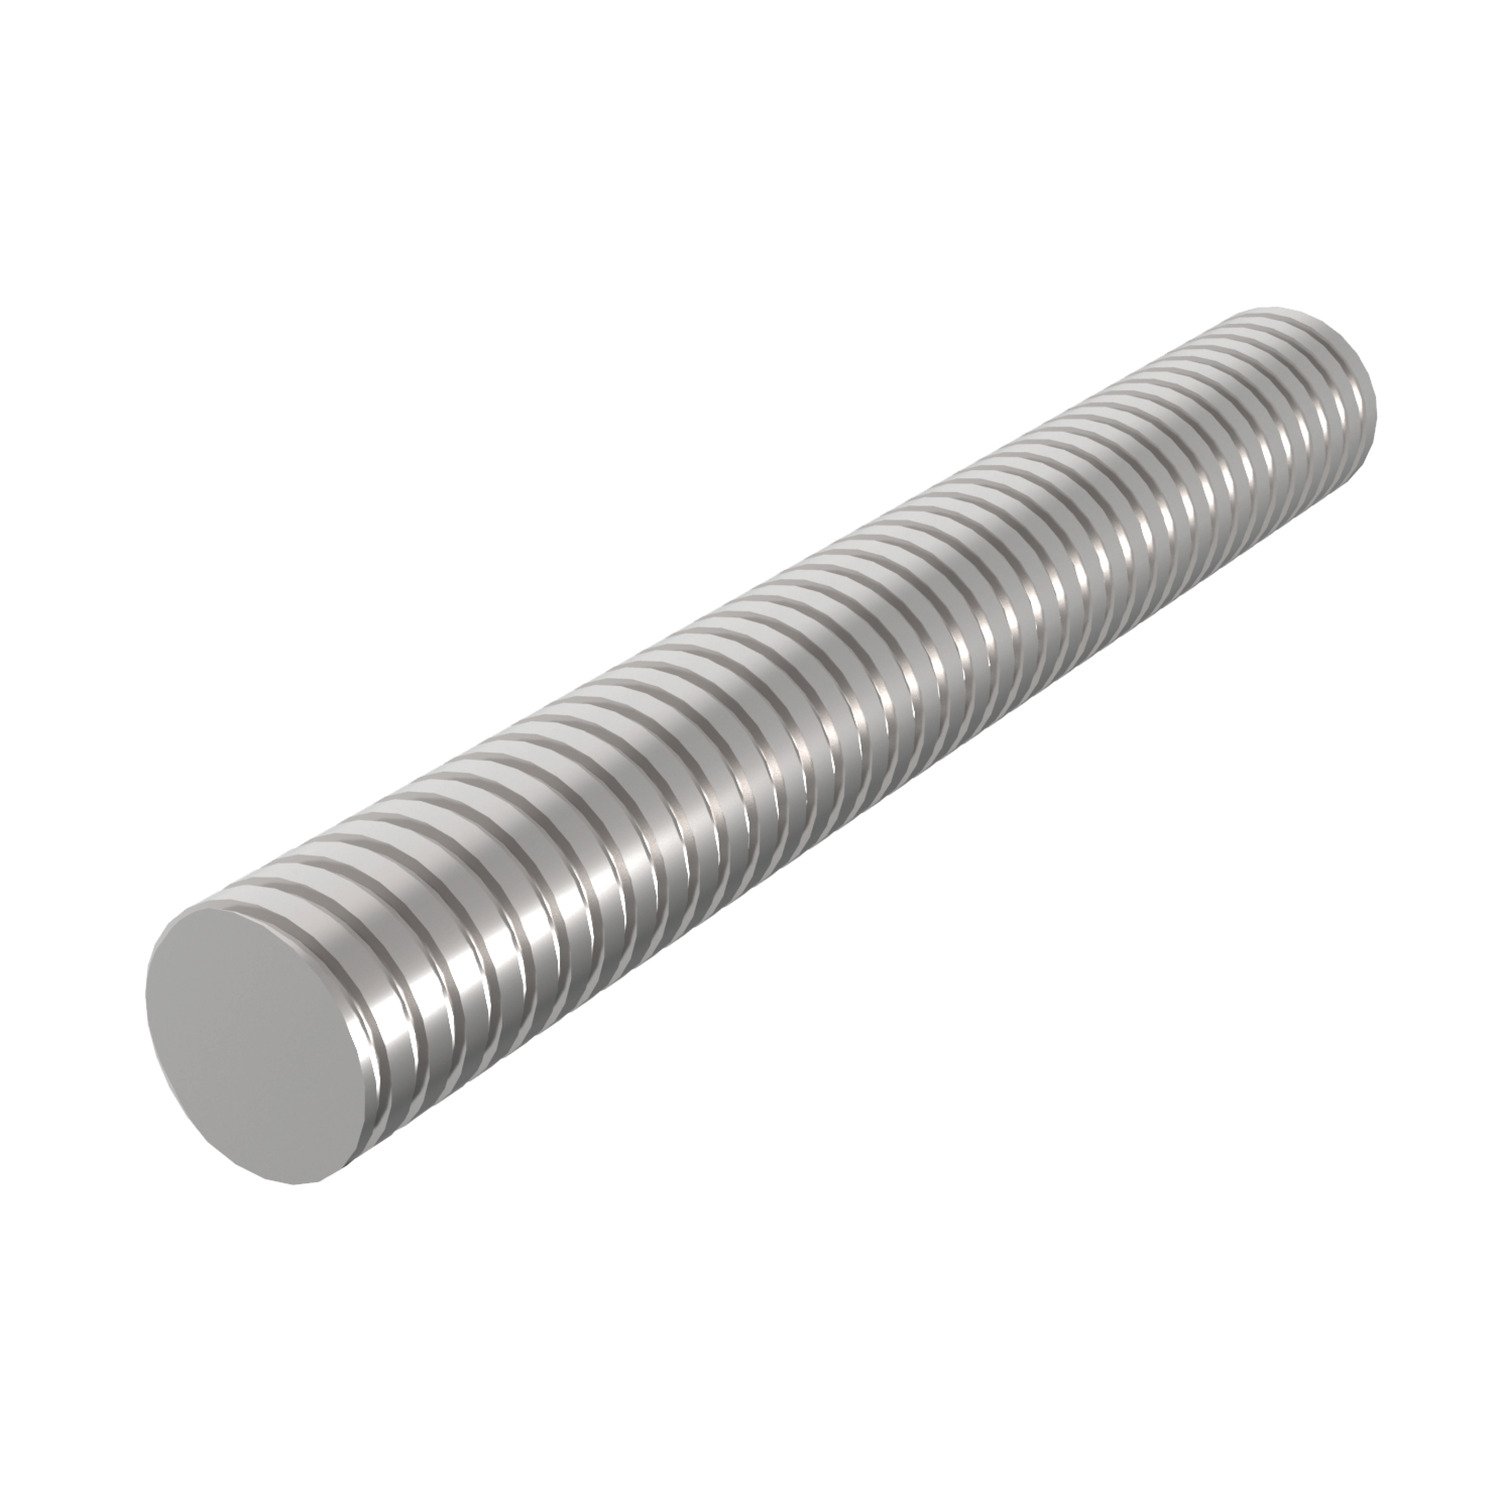 Product L1326, Stainless 304 Lead Screws left hand thread / 